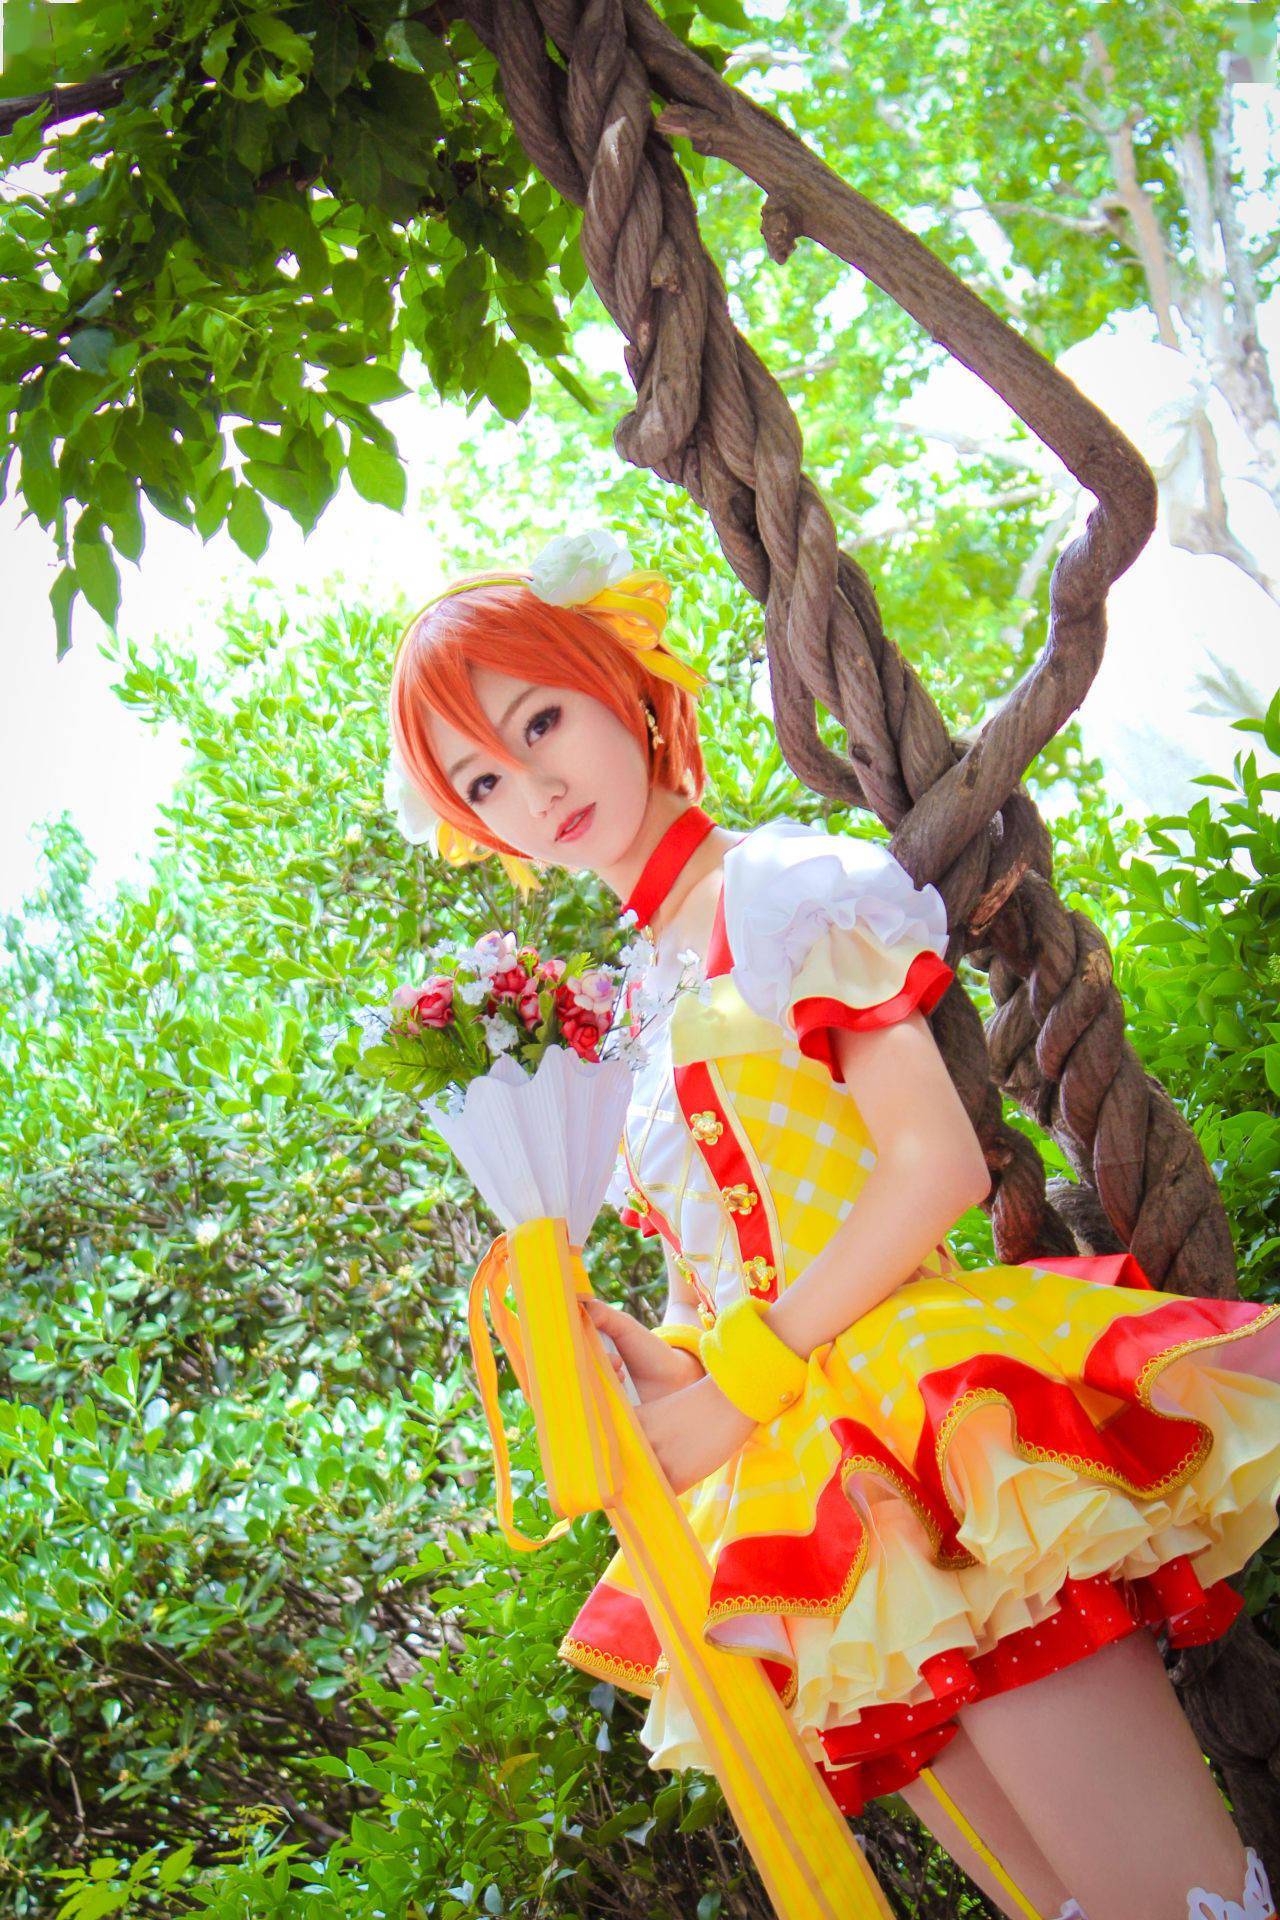 Lovelive星空凛cosplay 青春活泼 魏轩